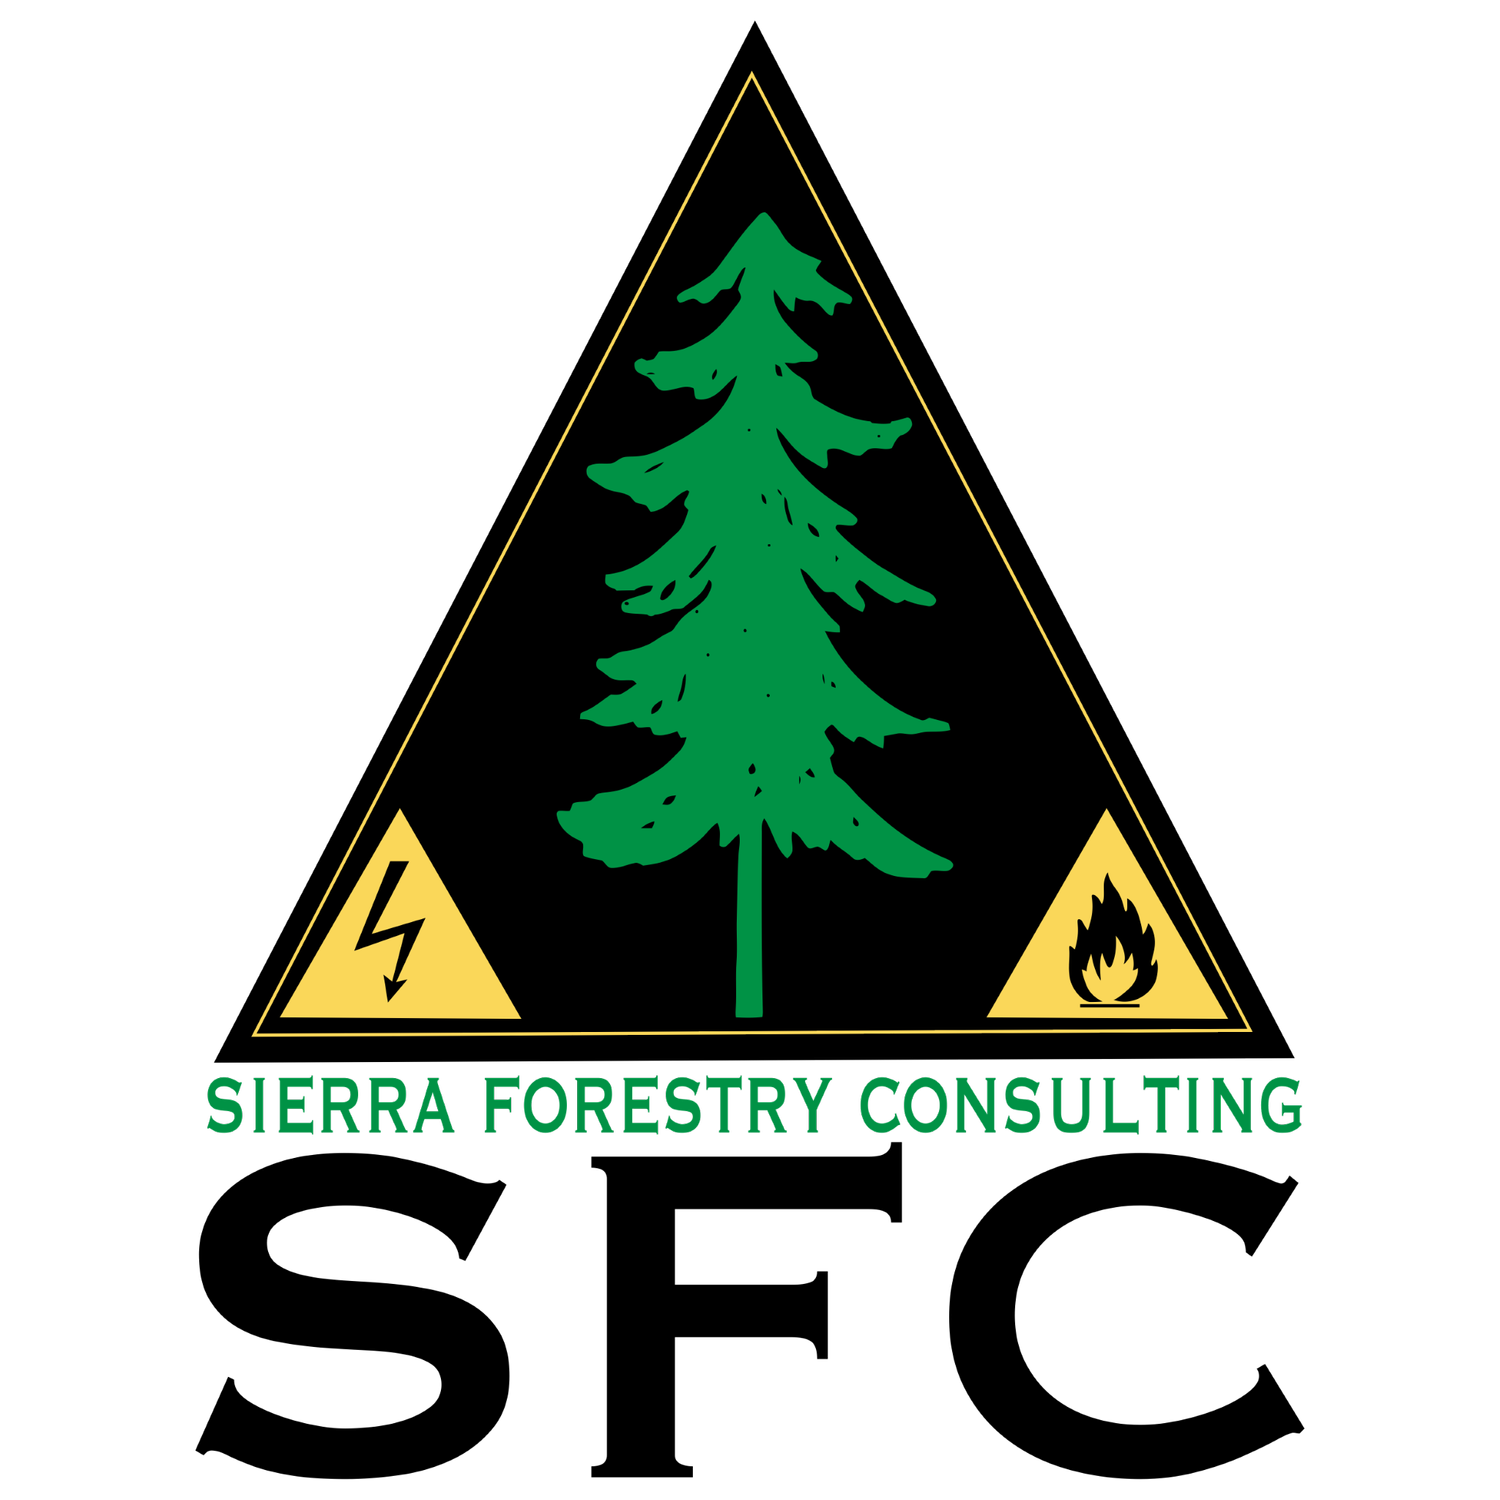 Sierra Forestry Consulting